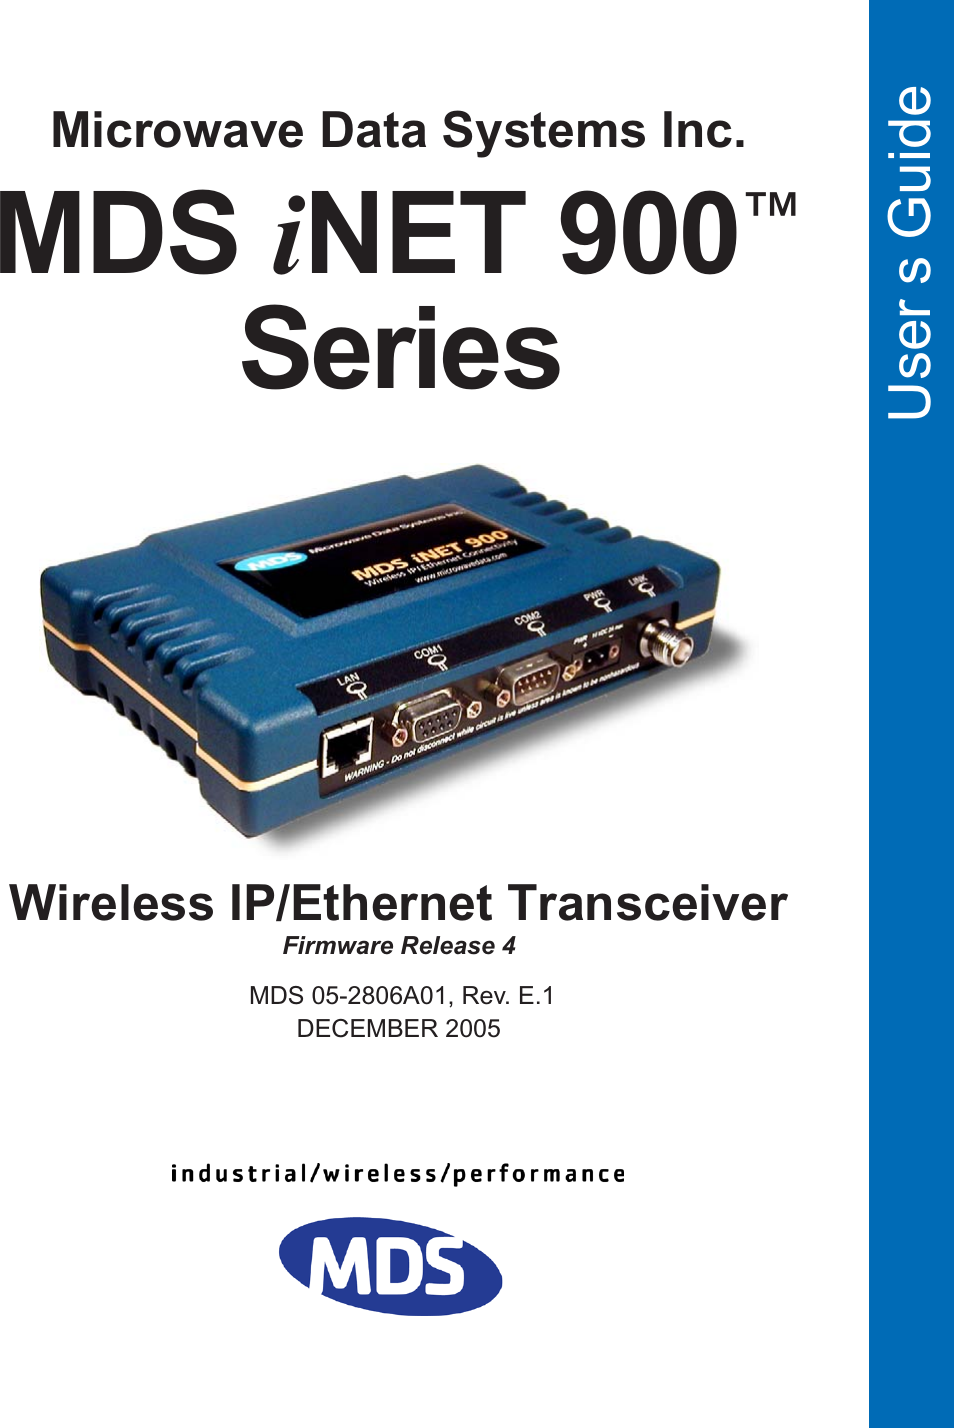  User s Guide MDS 05-2806A01, Rev. E.1DECEMBER 2005Wireless IP/Ethernet TransceiverFirmware Release 4MDS iNET 900™SeriesMicrowave Data Systems Inc. 